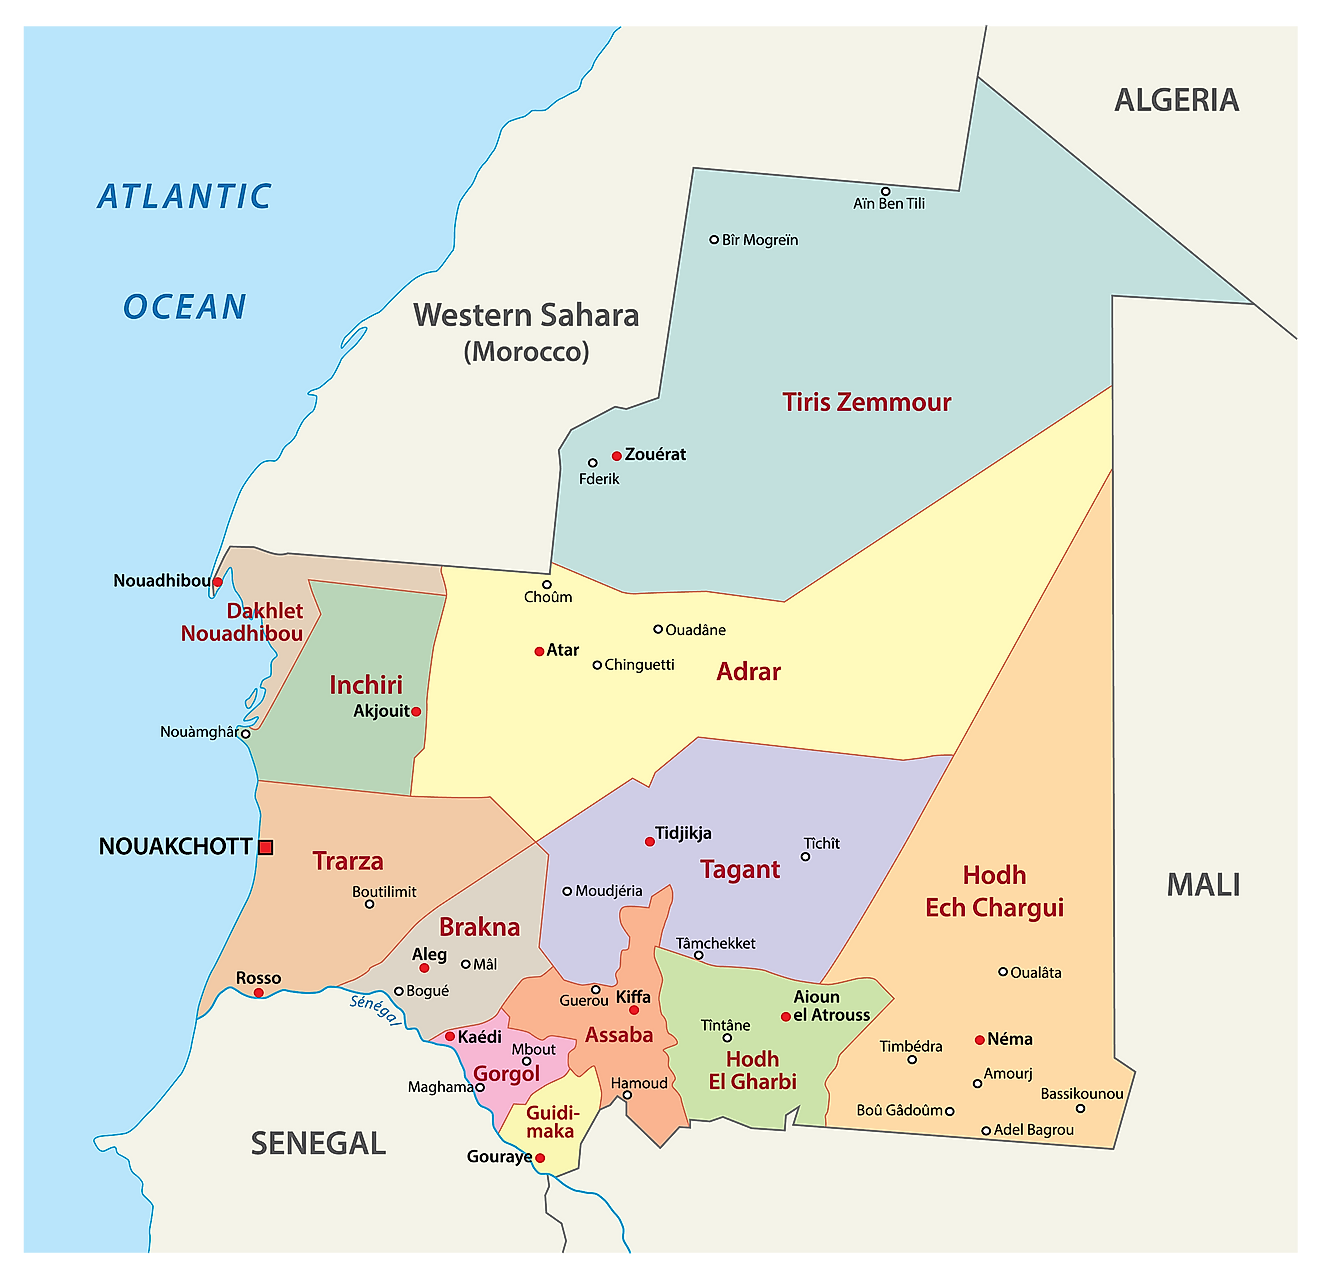 Political Map of Mauritania displaying the 12 regions, their capitals, and the national capital district of Nouakchott.